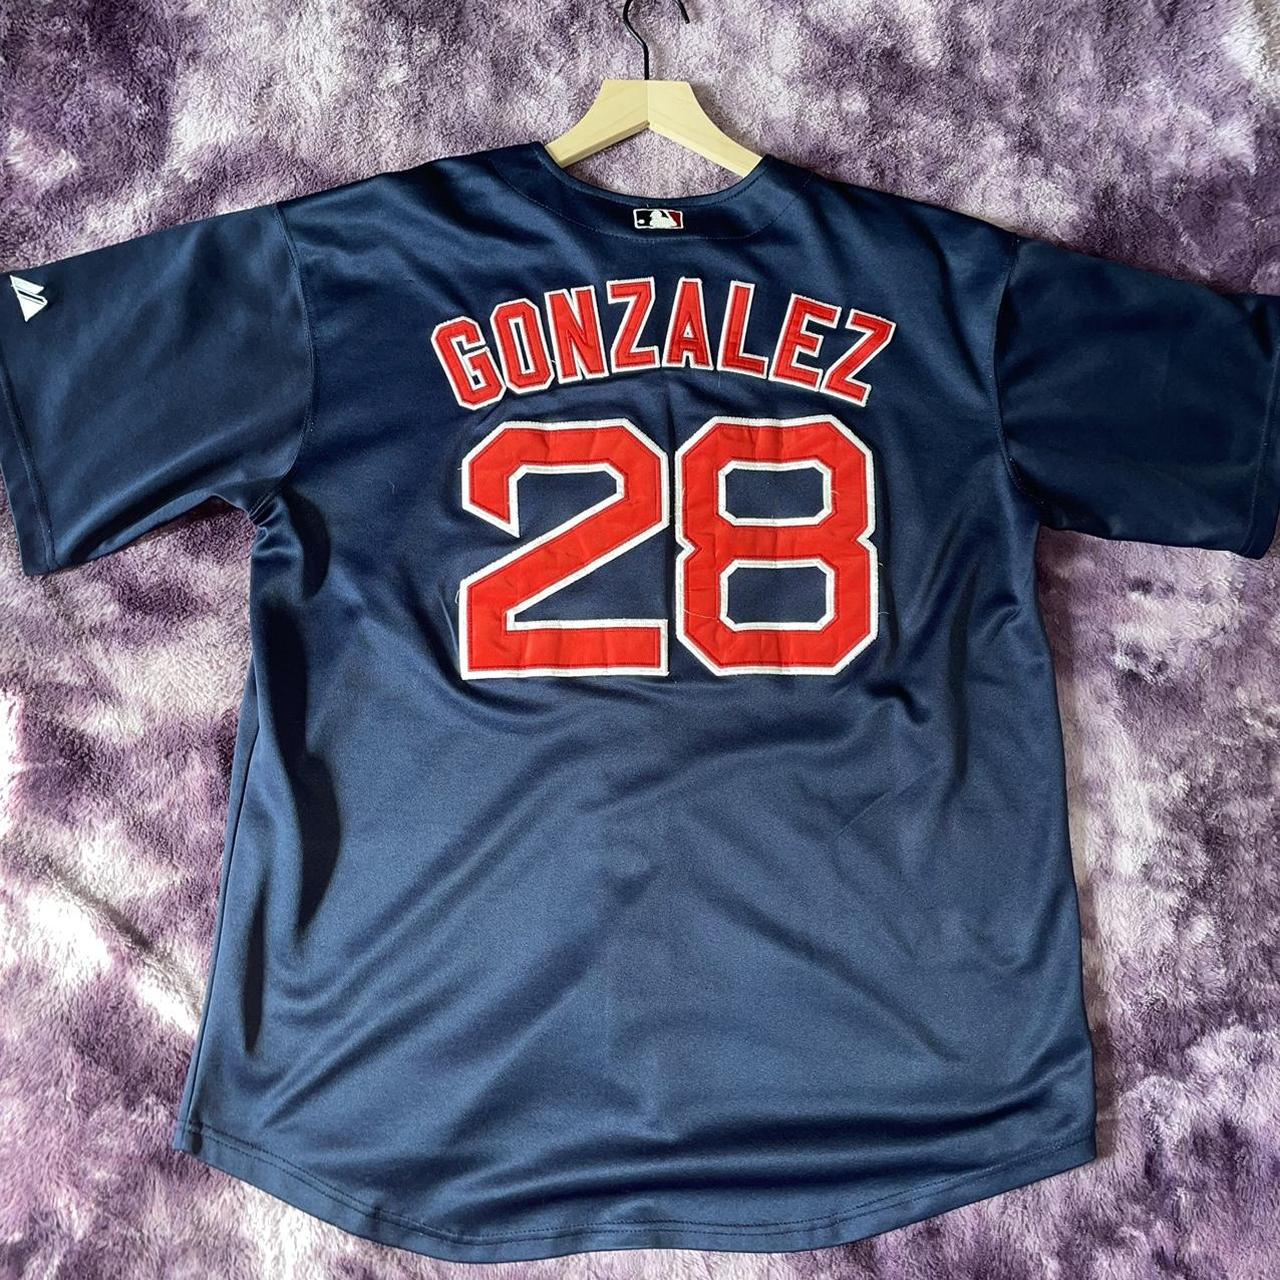 Bostons Red Sox #28 Jersey ⚠️Please no PayPal, I - Depop